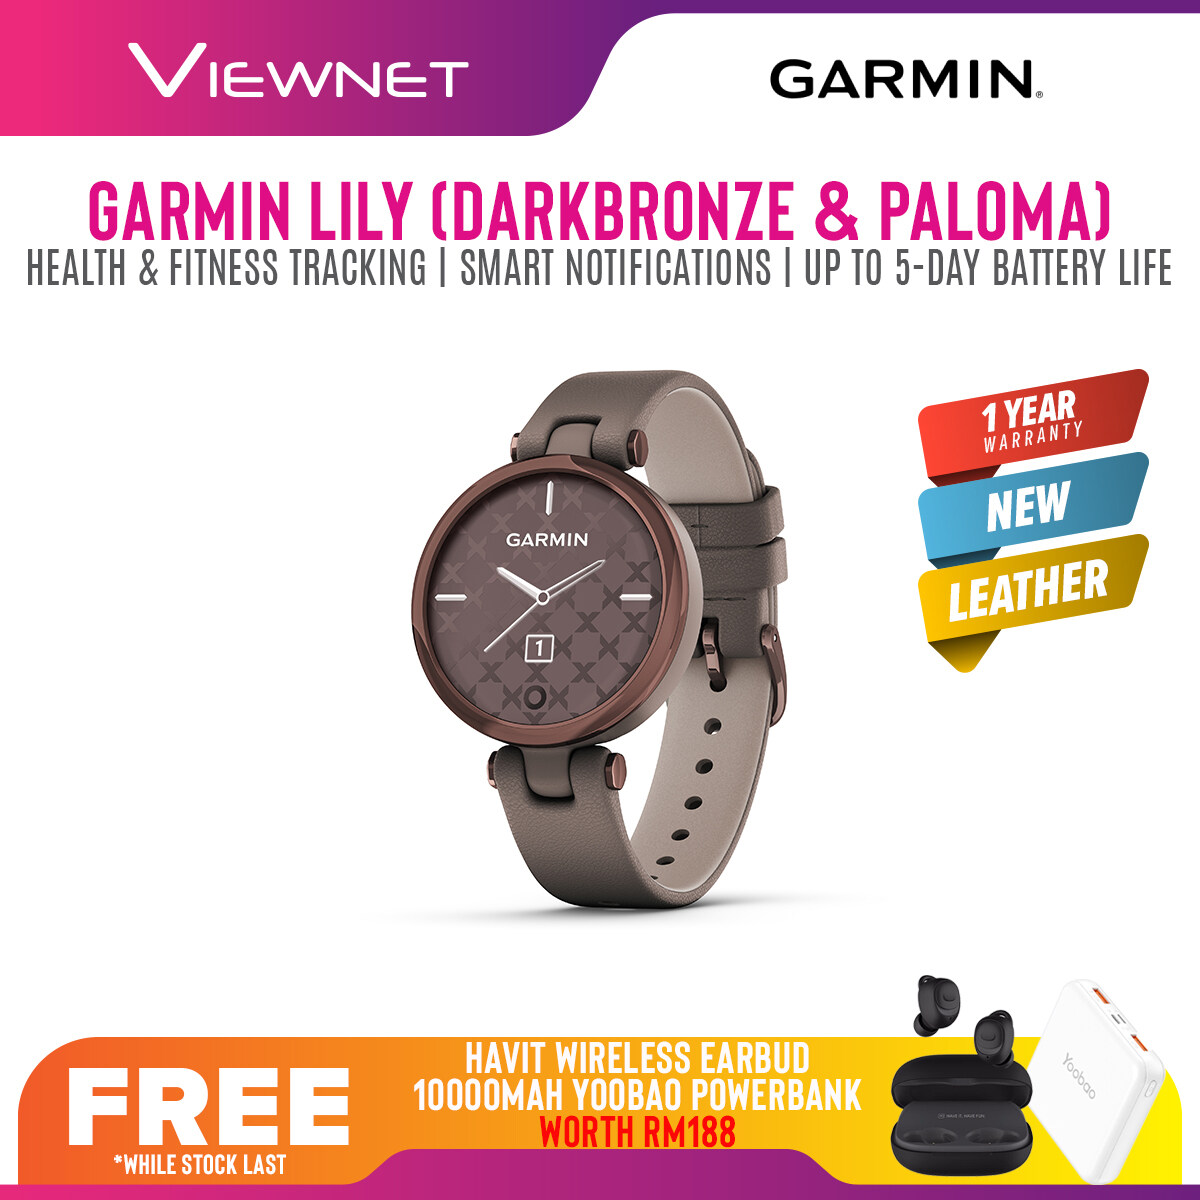 [NEW] Garmin Lily Smart Watch (Leather) - Stylish Patterned Lens, Smart Touchscreen, Small and Fashionable smartwatch